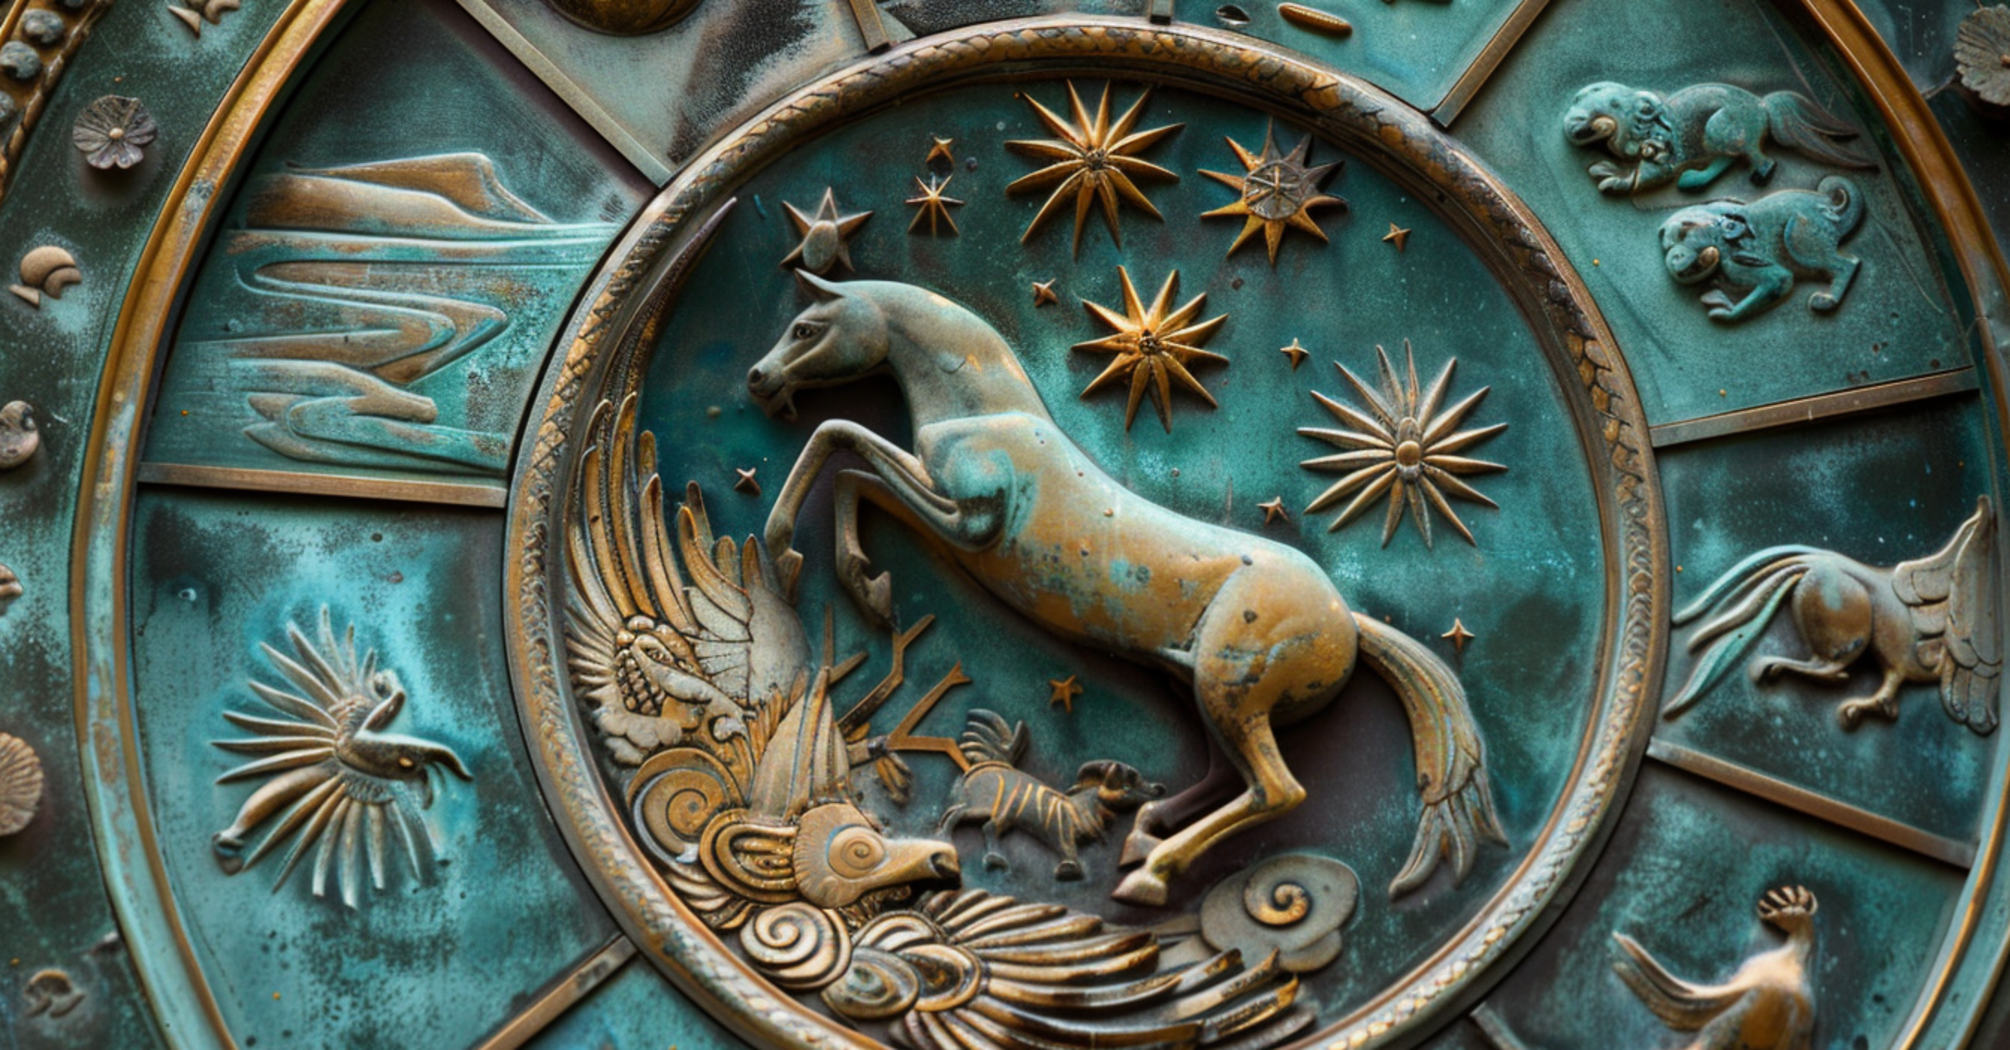 The day of harmonious energy and resourcefulness: Chinese horoscope for May 31